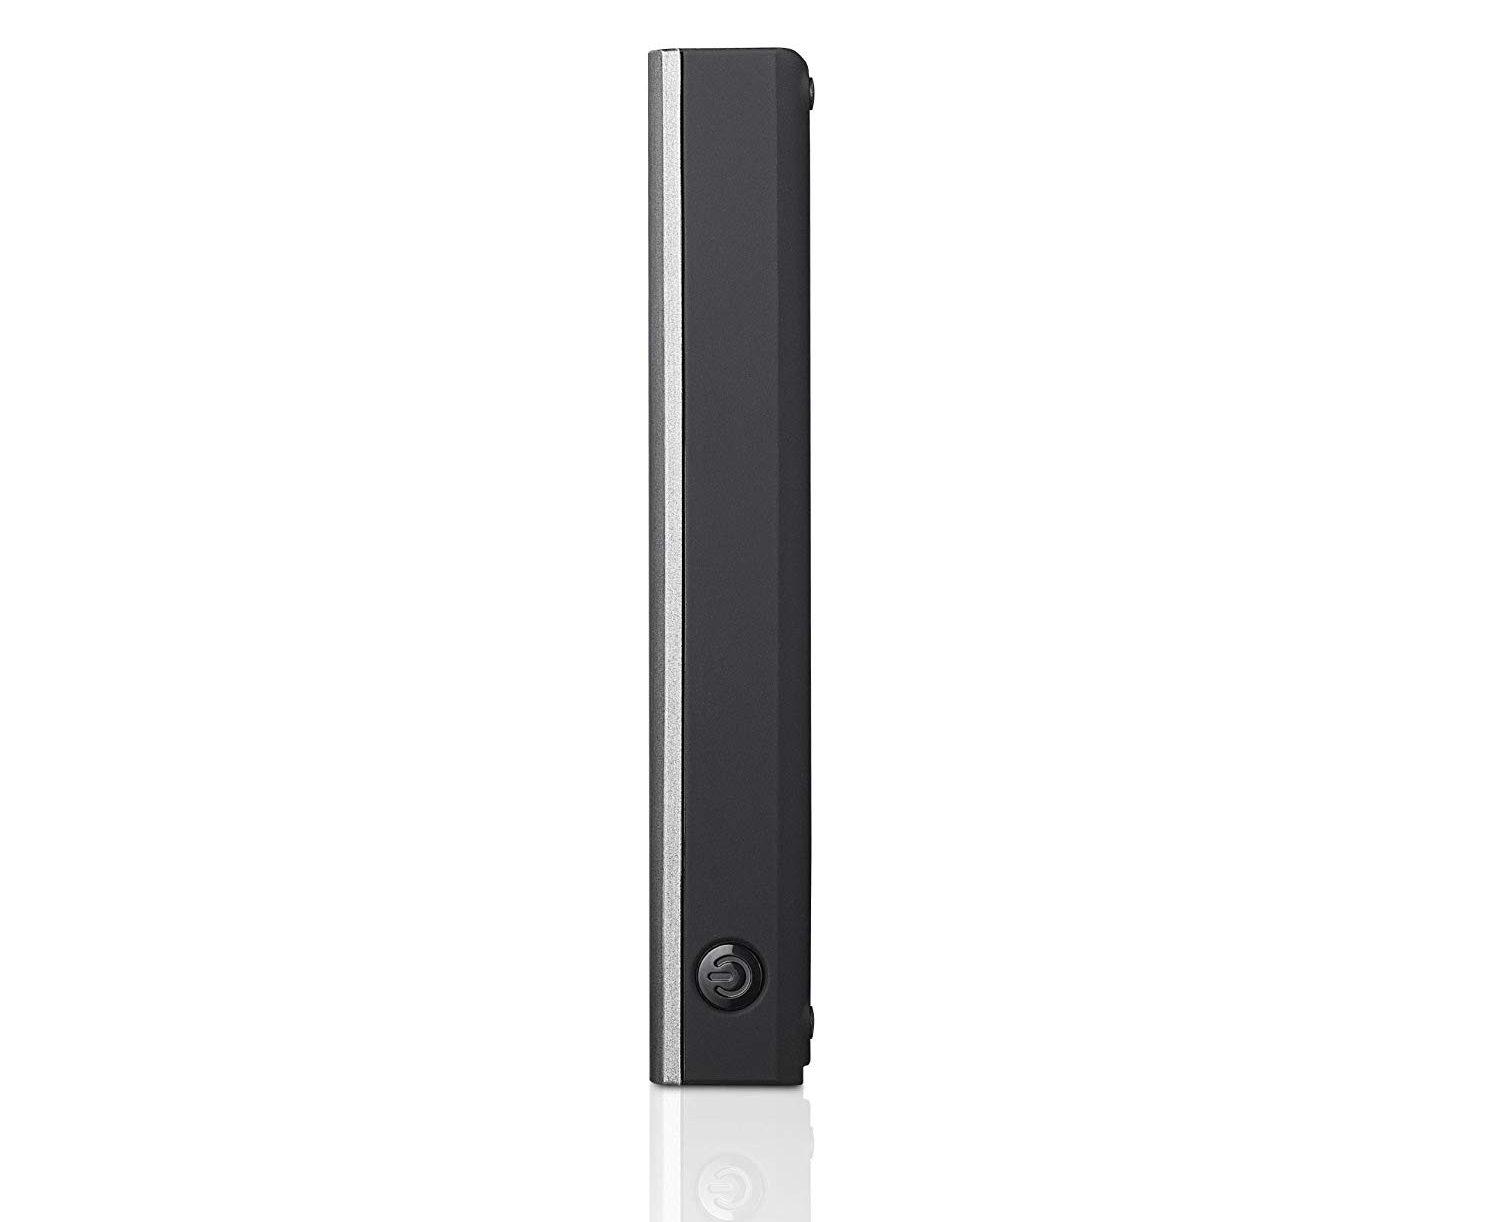 Ổ Cứng HDD Seagate Wireless Plus Mobile Device Storage 1TB (STCK1000300)